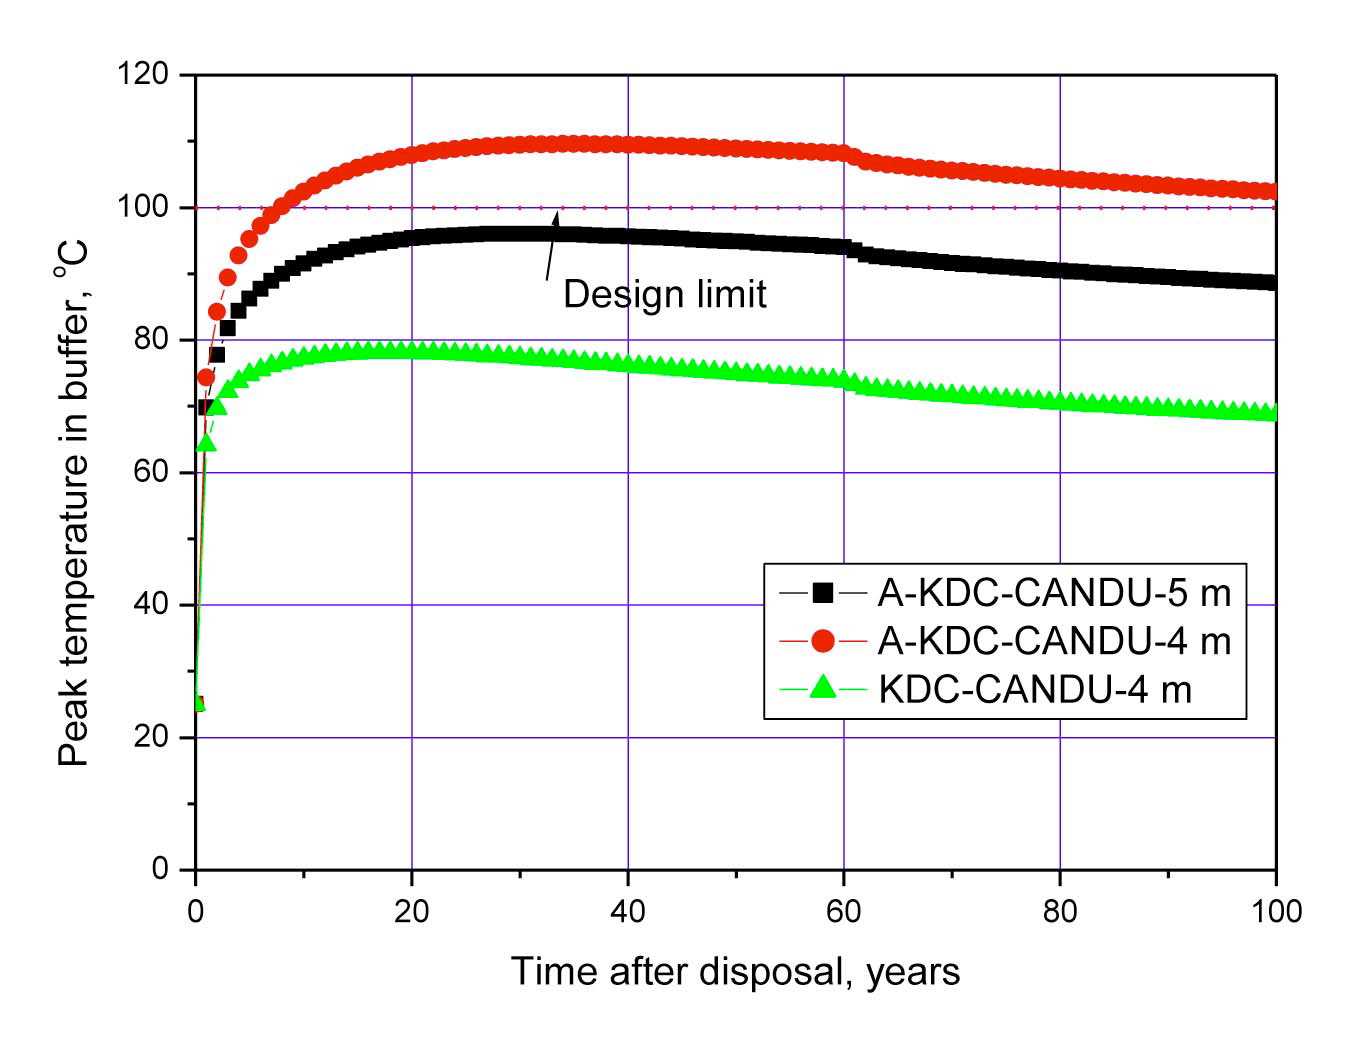 Results of Thermal Analysis for a CANDU Disposal System.